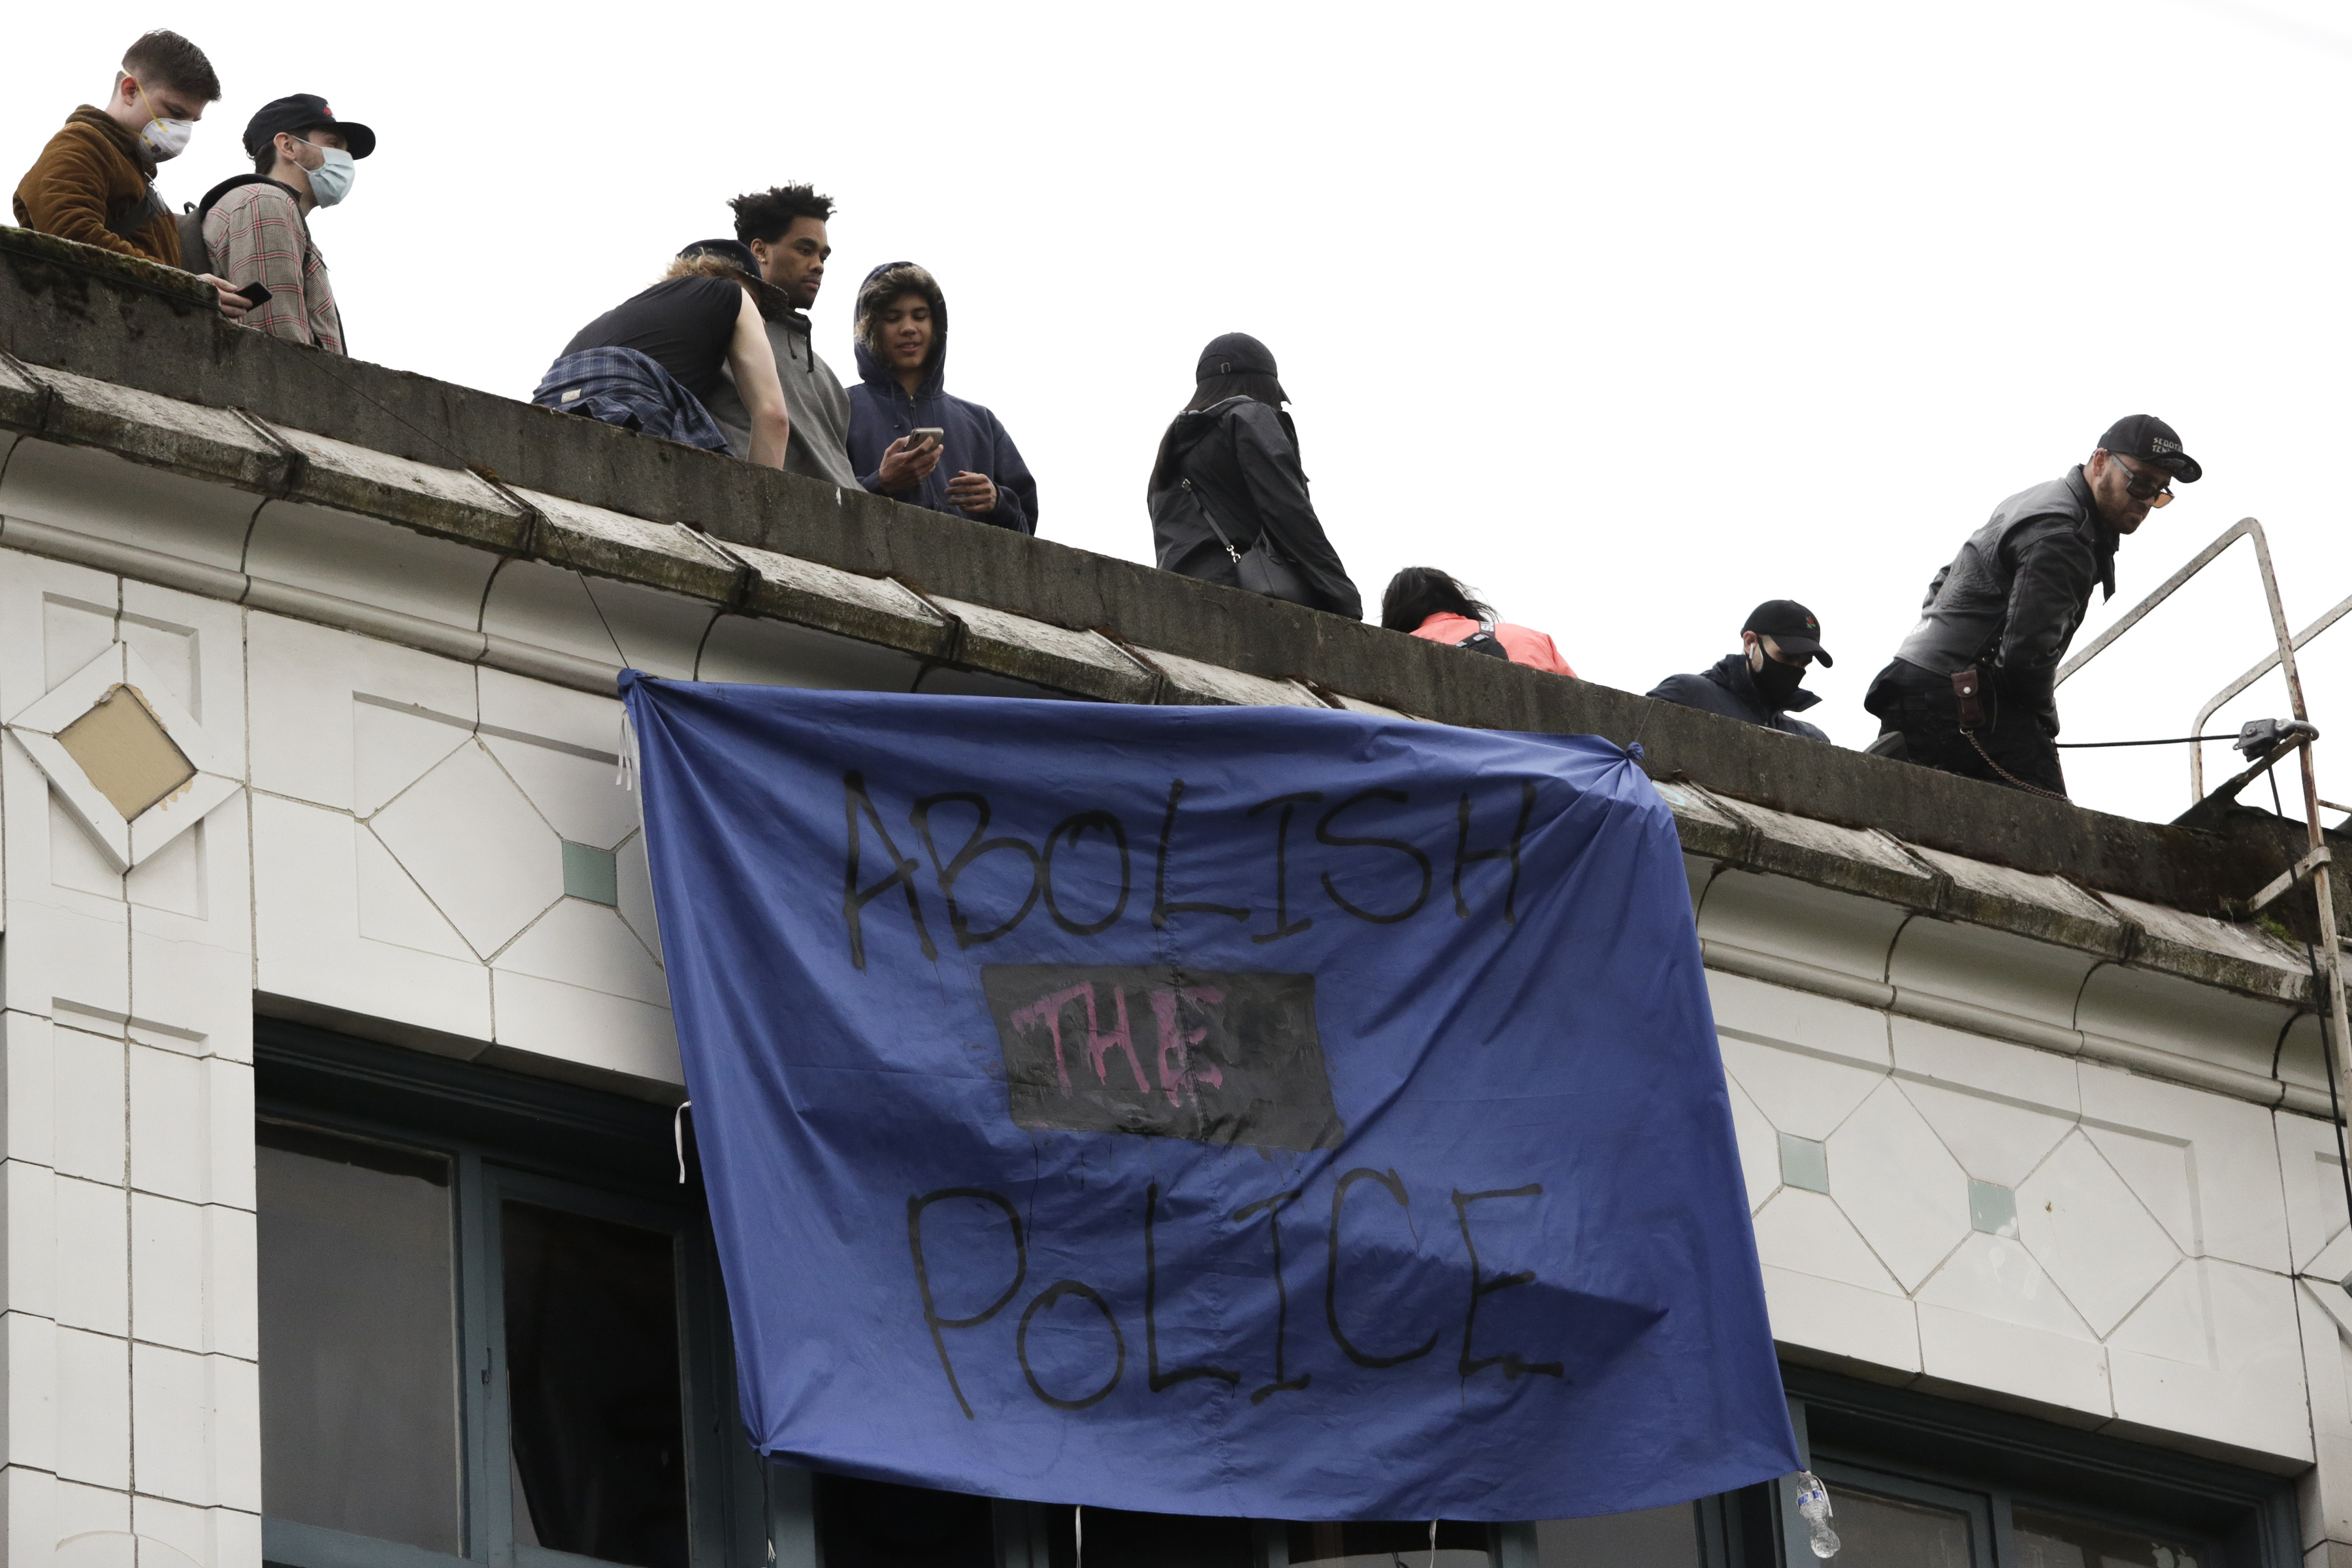 A banner which reads "abolish the police" hangs from a building on June 12, 2020 in an area formerly known as the Capitol Hill Autonomous Zone located in Seattle. (Photo: Jason Redmond/AFP via Getty Images)